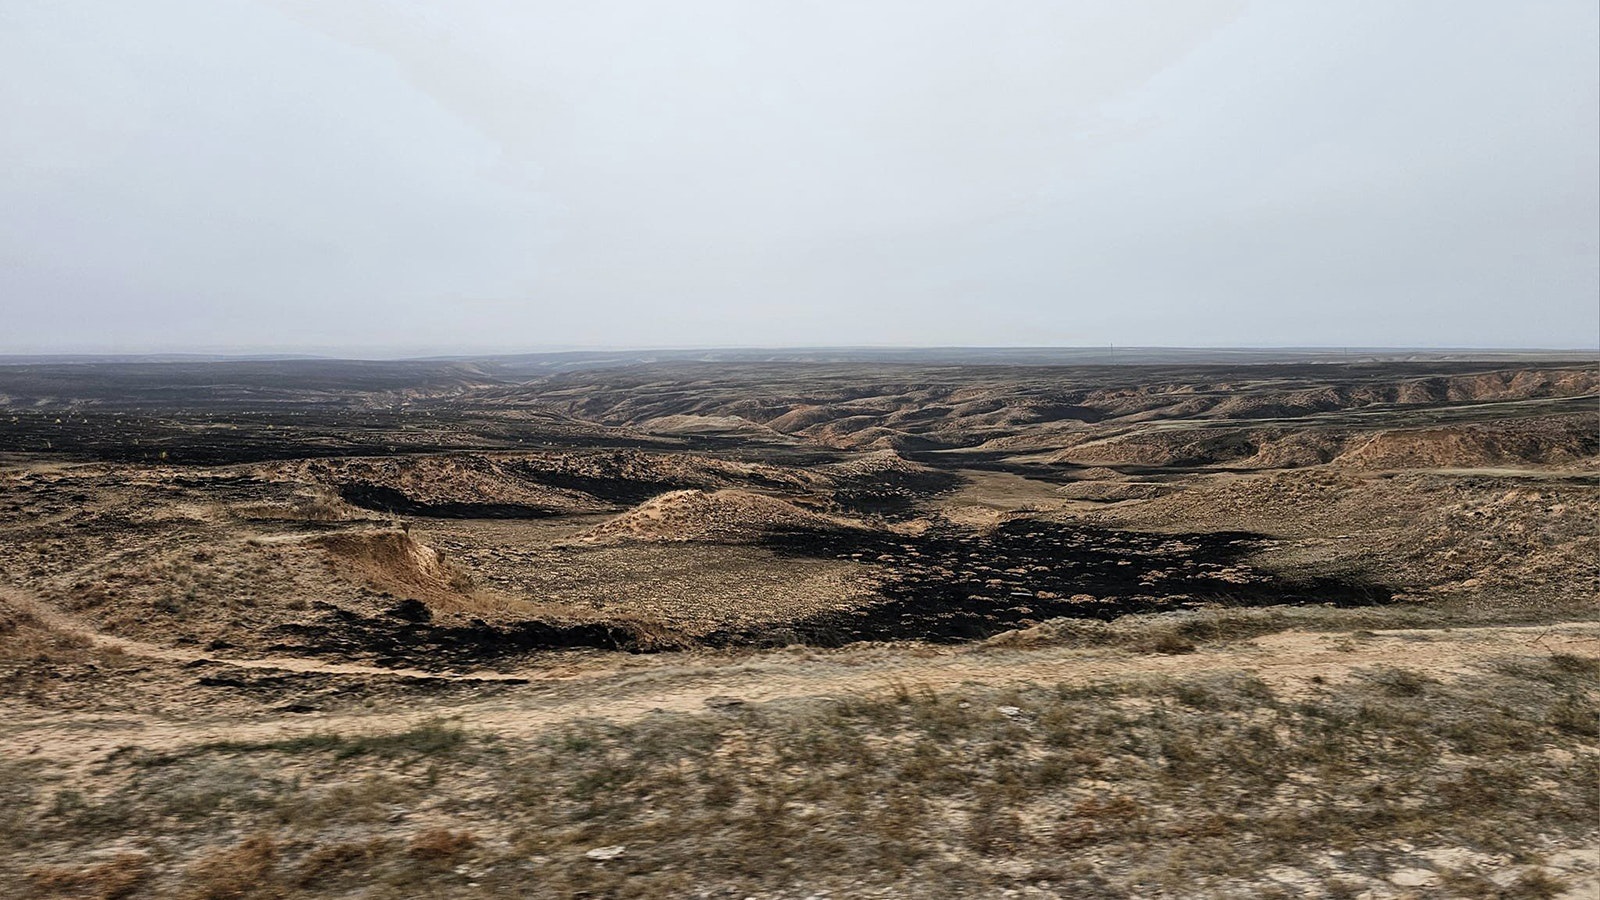 The 1.1 million-acre wildfire complex has devastated entire ranches and the burned-out aftermath is visible as far as the eye can see.